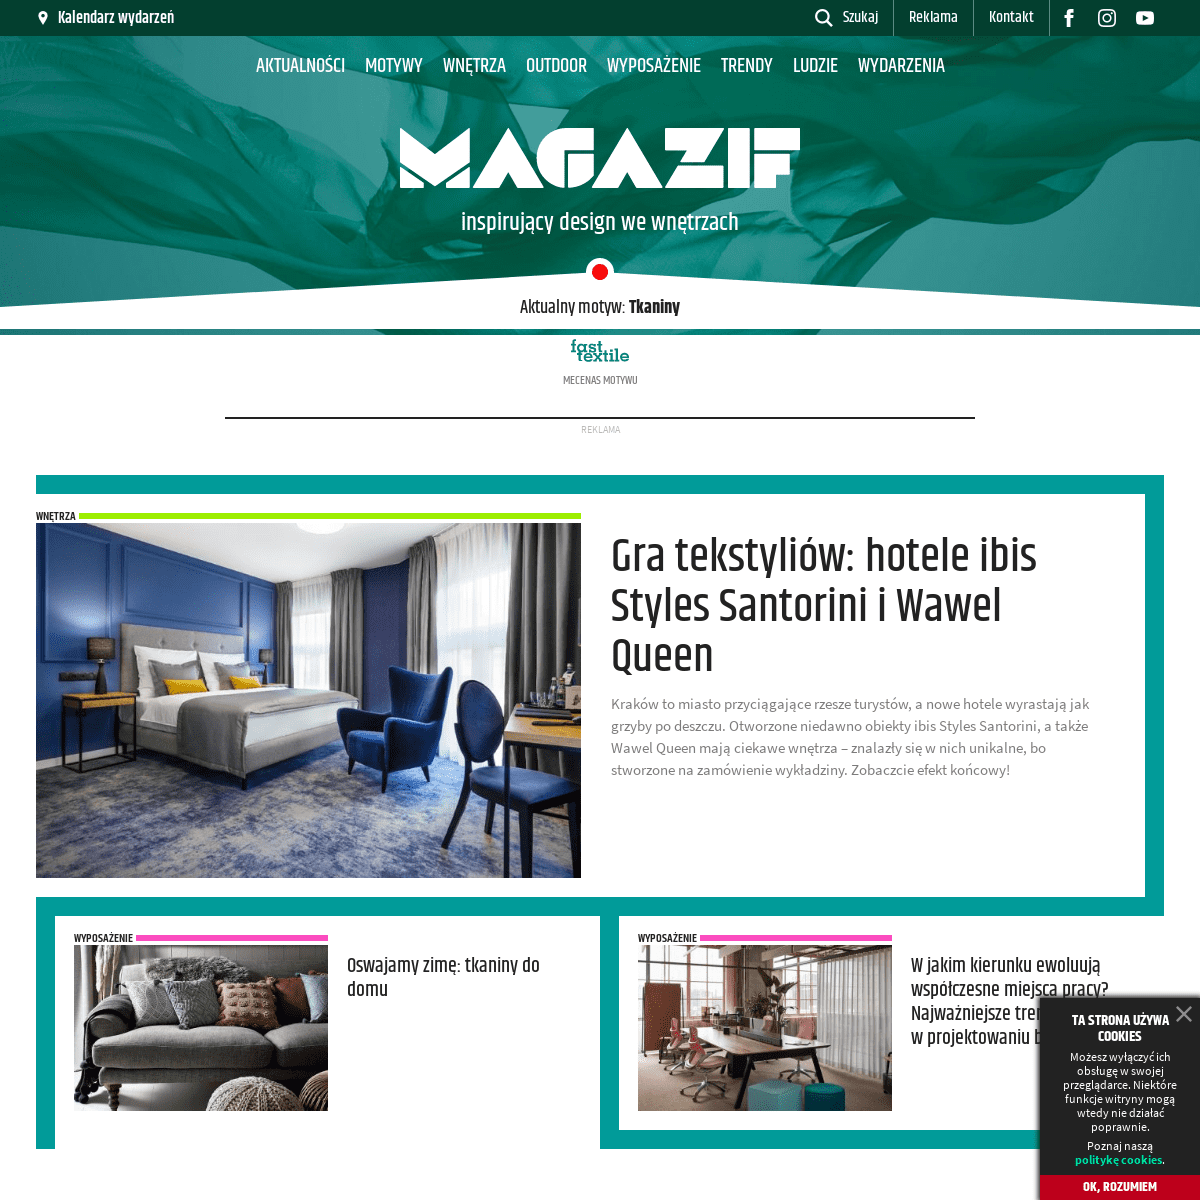 A complete backup of magazif.com